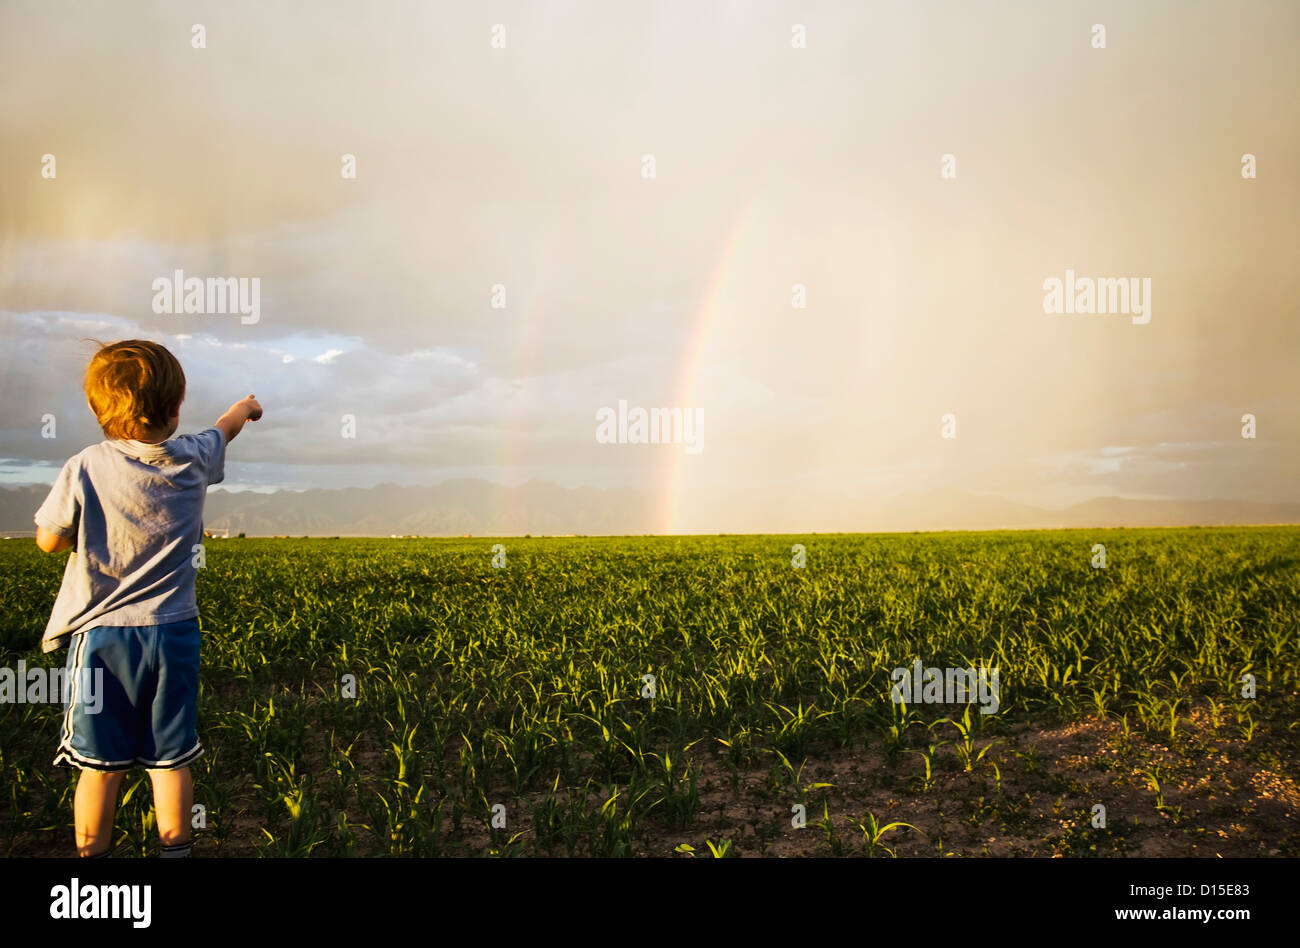 USA, Colorado, Boy (2-3) in field pointing at rainbow Stock Photo